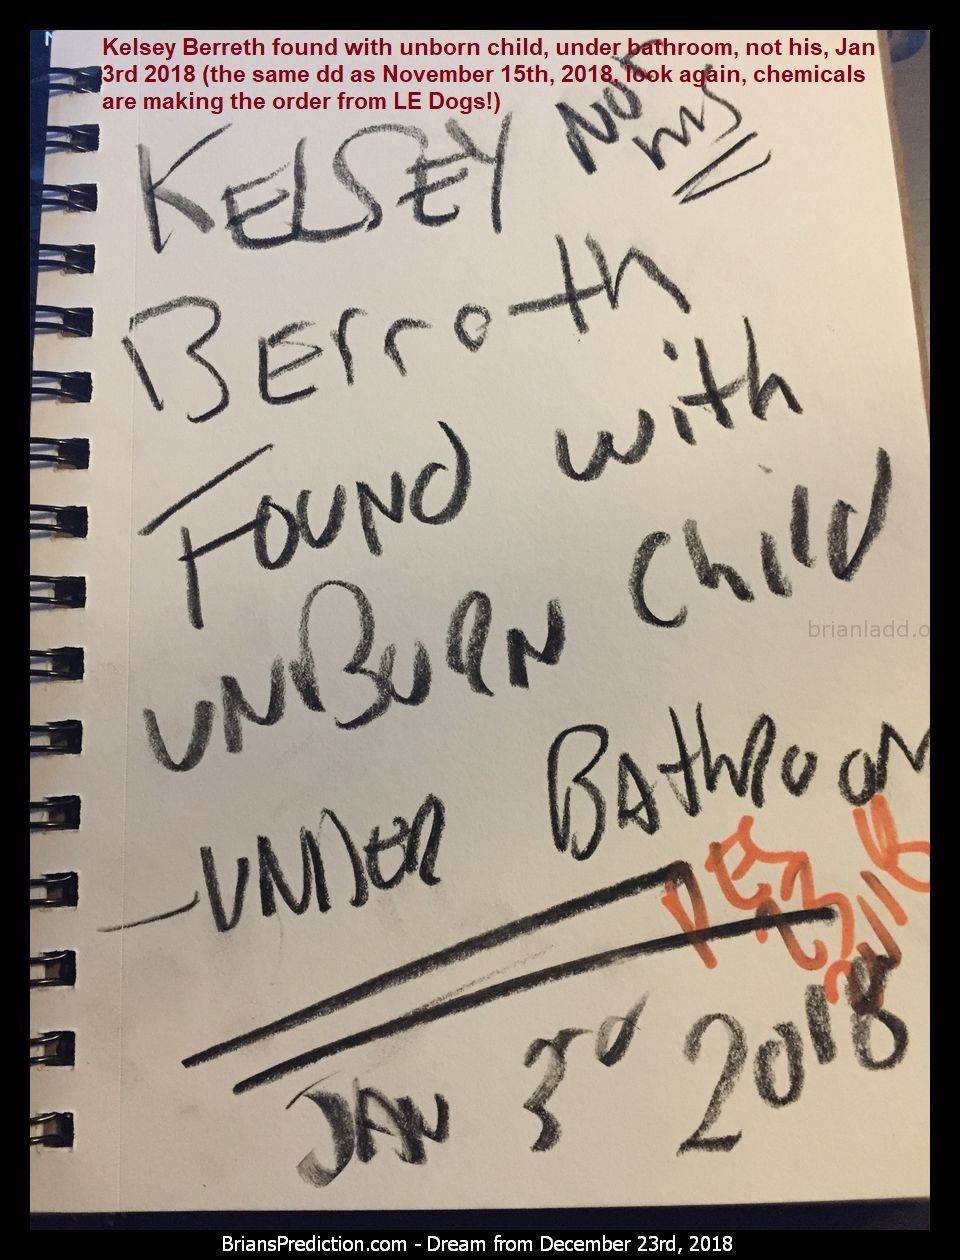 11495 23 December 2018 2 - Kelsey Berreth Found With Unborn Child, Under Bathroom, Not His, Jan 3rd 2018 (the Same Dd As...
Kelsey Berreth Found With Unborn Child, Under Bathroom, Not His, Jan 3rd 2018 (the Same Dd As November 15th, 2018, Look Again, Chemicals Are Making The Order From Le Dogs!)  Dream Number 11495 23 December 2018 2 Psychic Prediction
